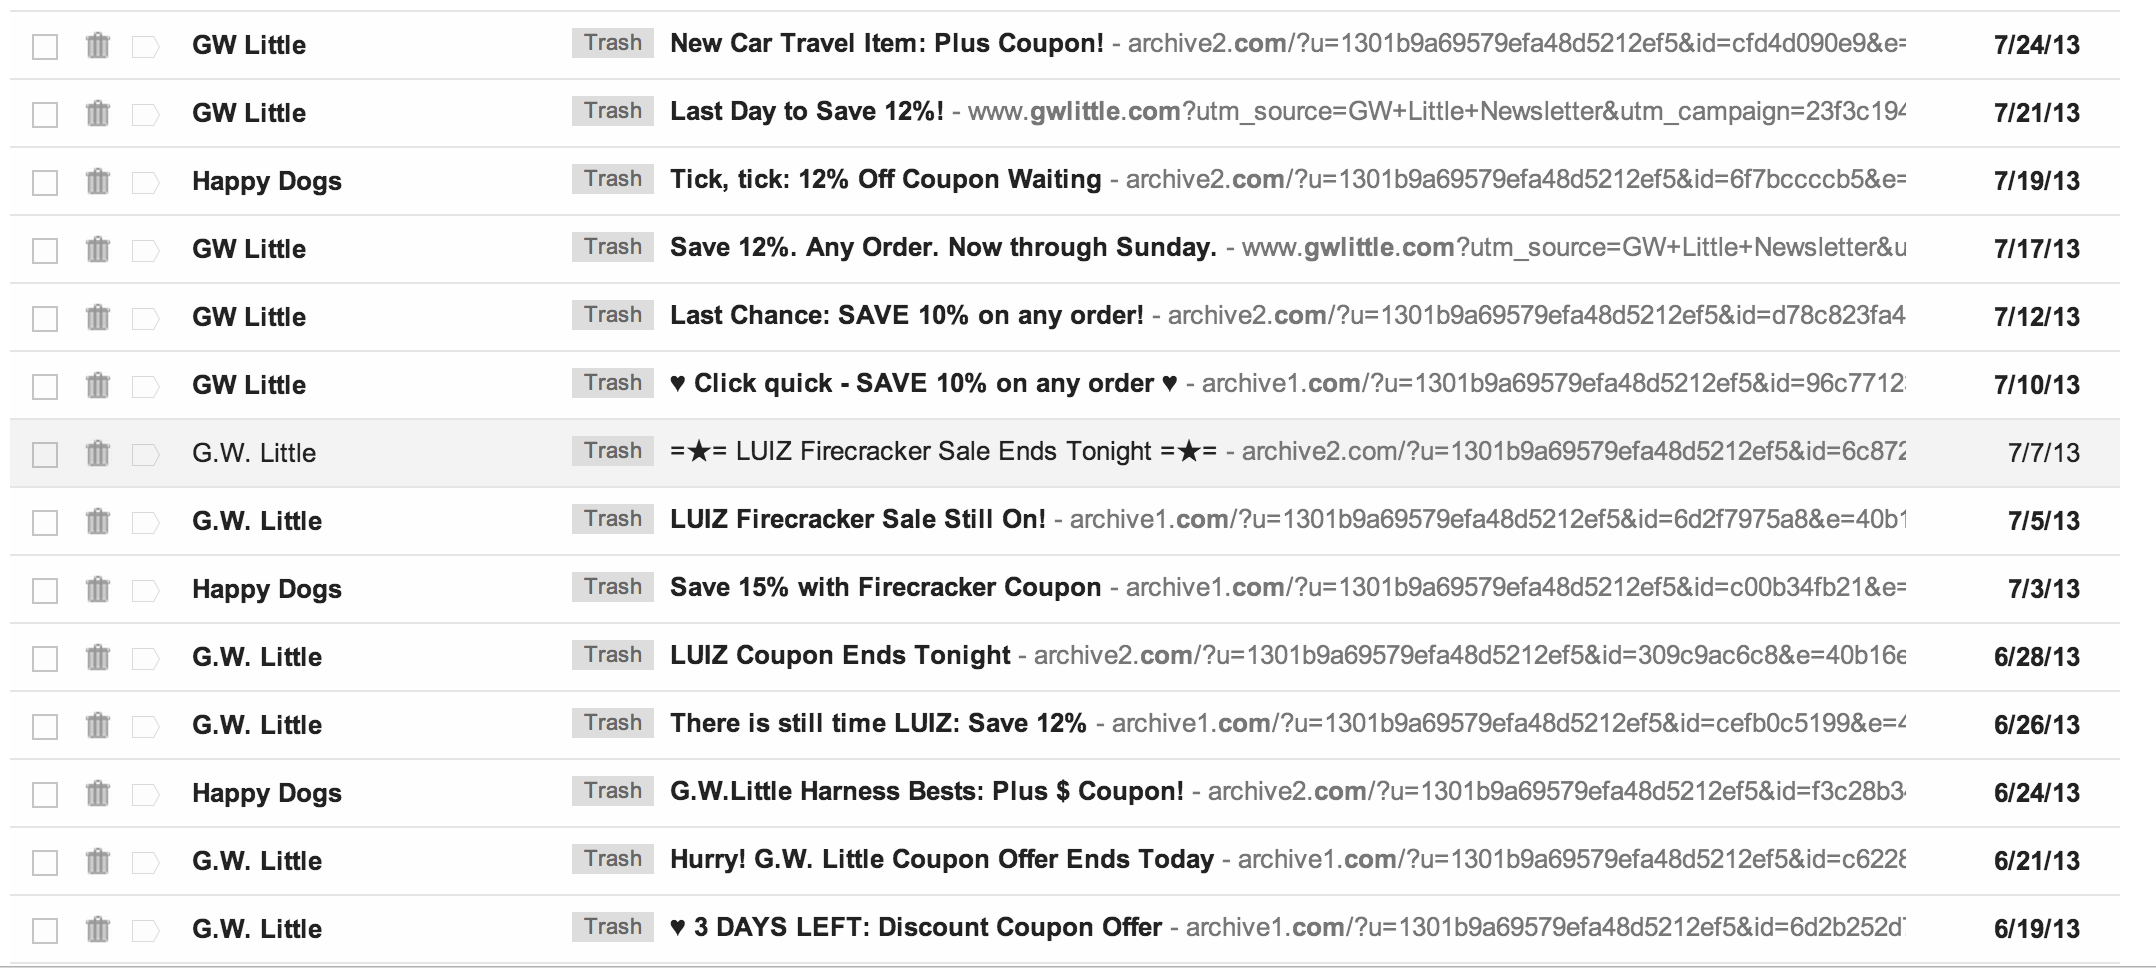 GW Little, eCommerce Emails from June to July